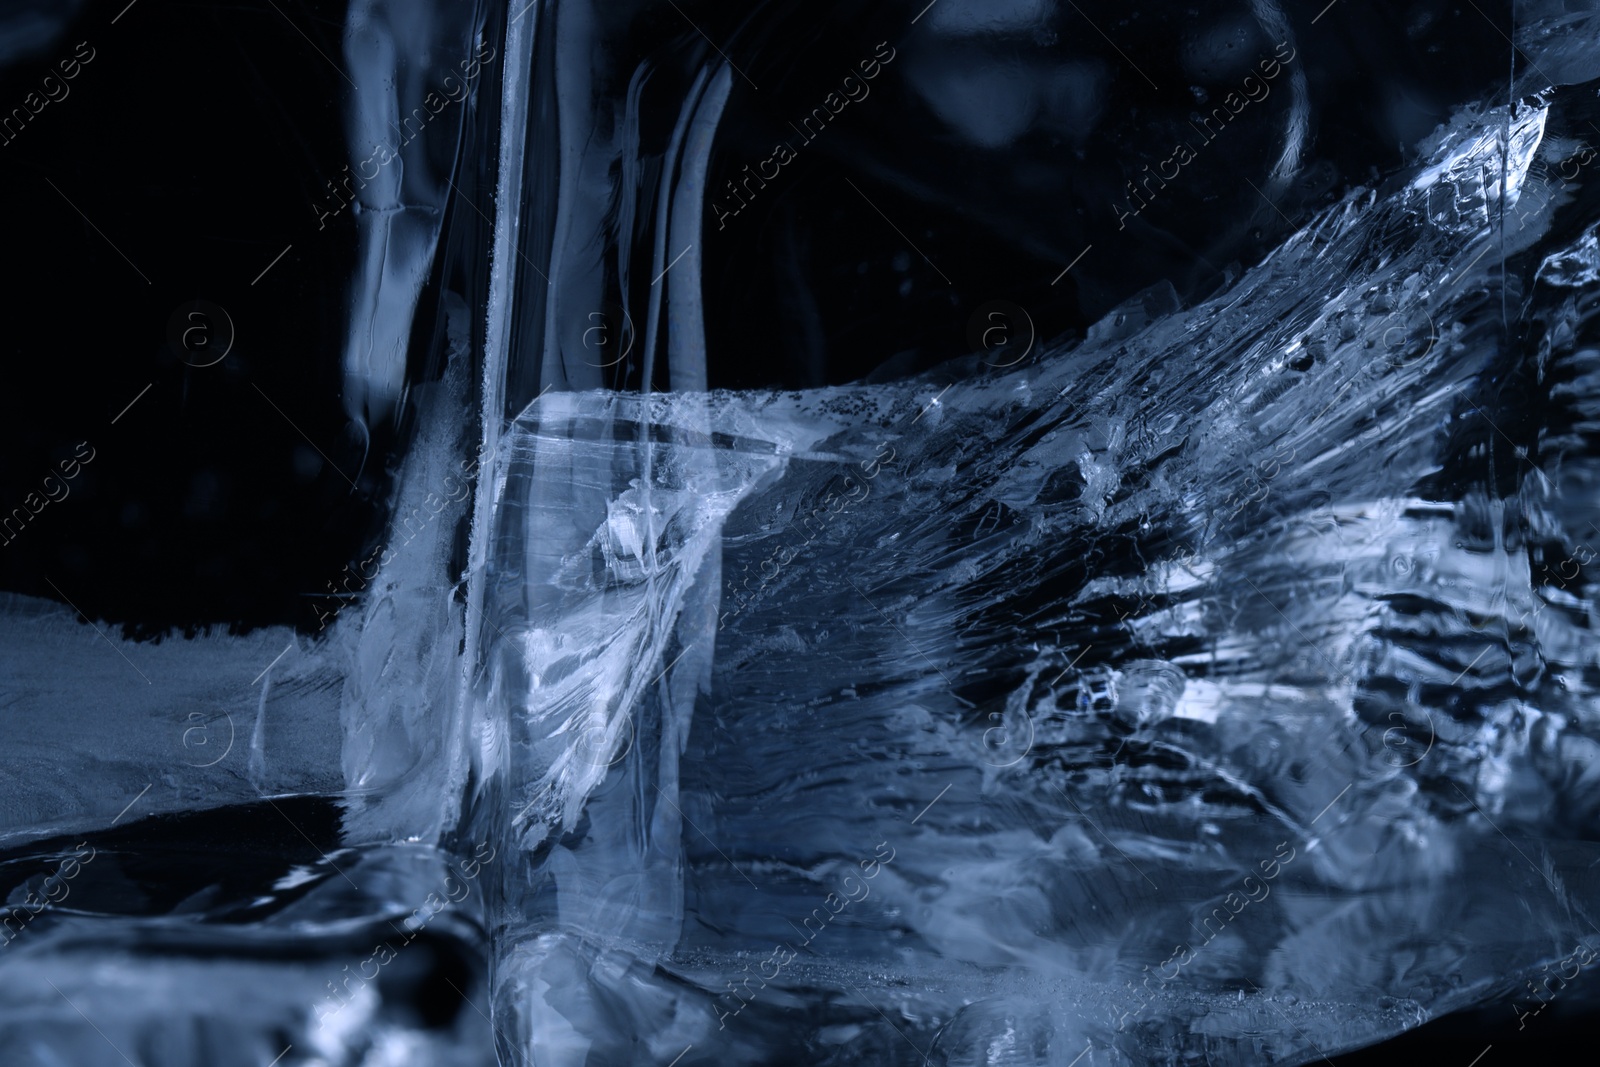 Photo of Beautiful clear ice as background, closeup view